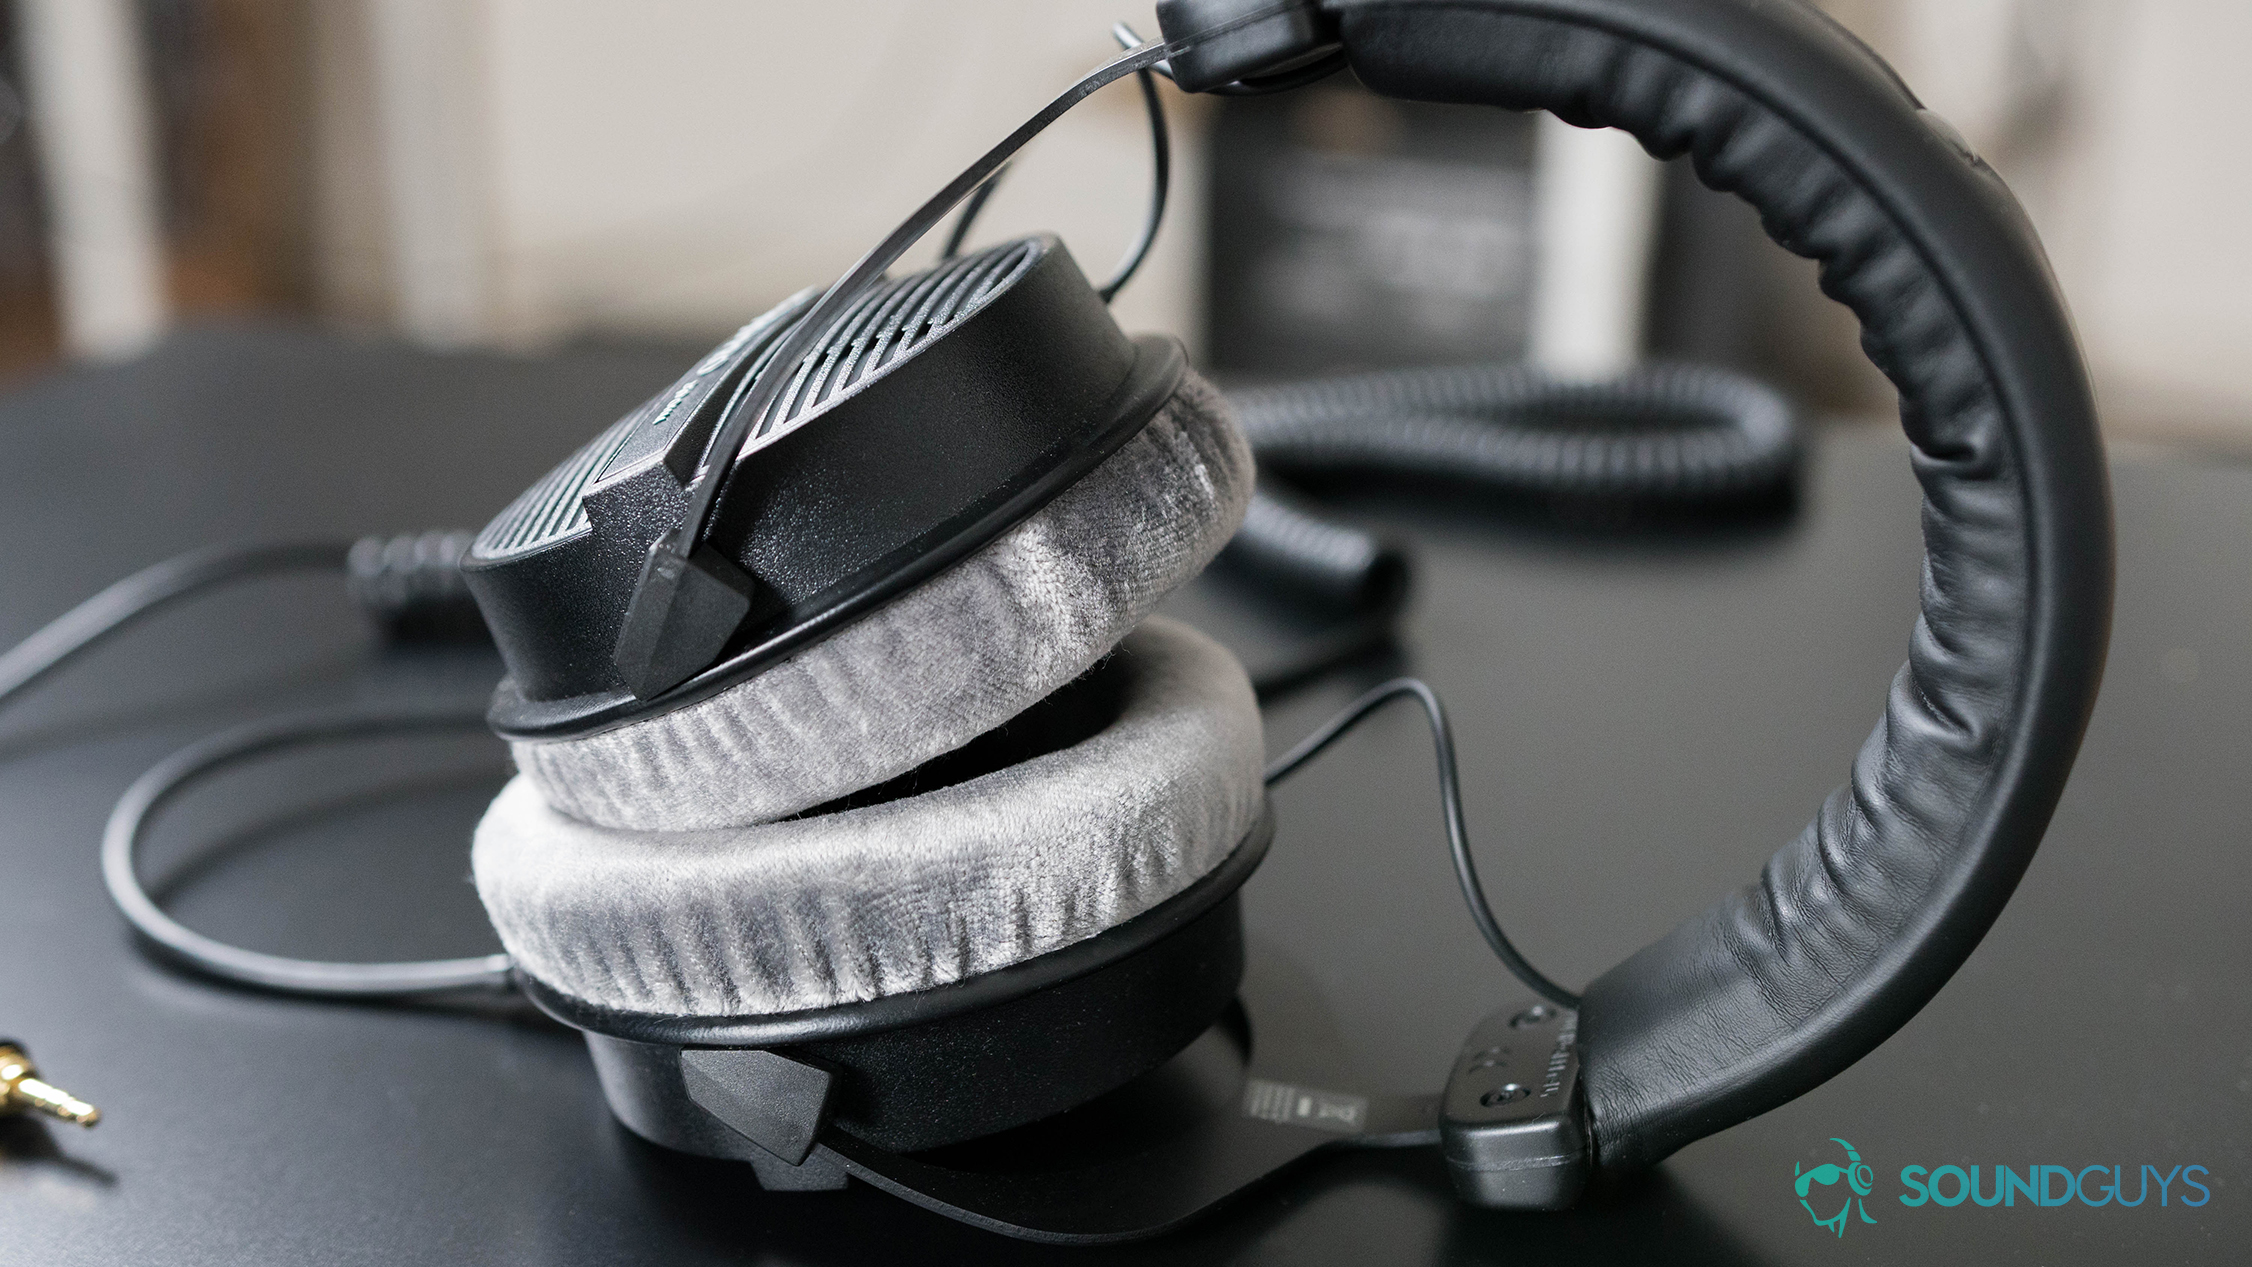 A photo of the Beyerdynamic DT 990 PRO and its silver velour ear pads.